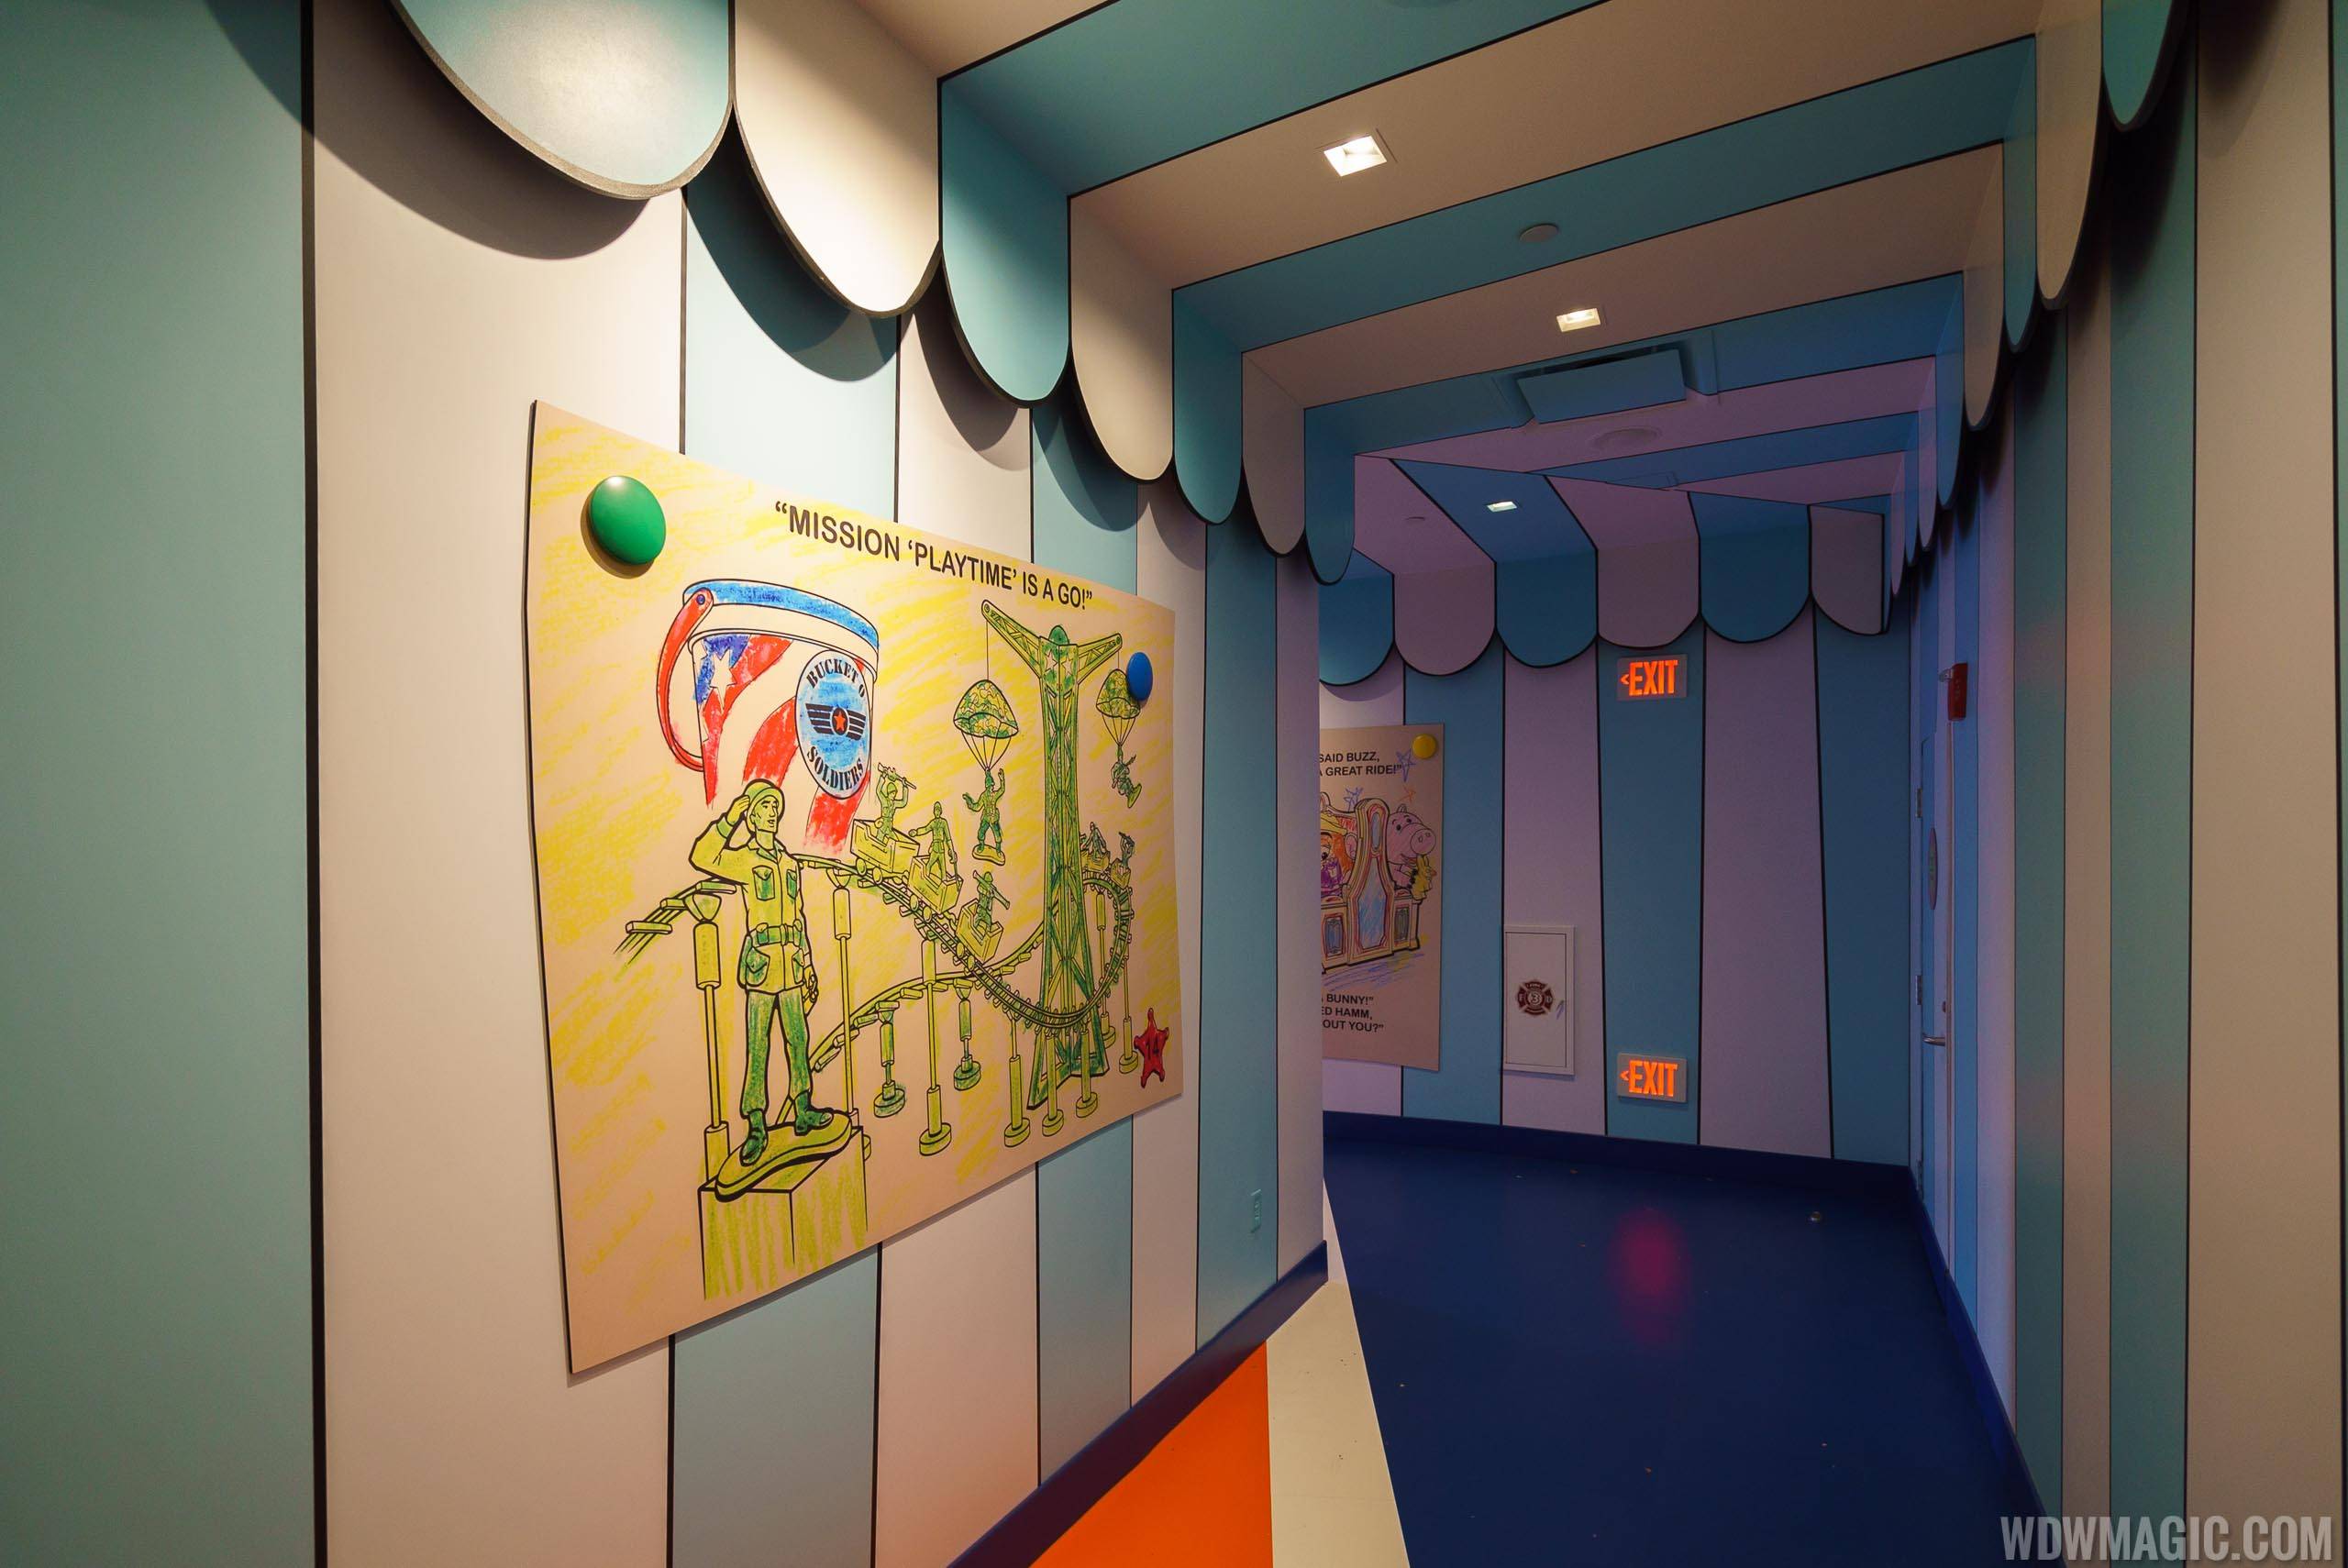 Third Track expansion at Toy Story Mania